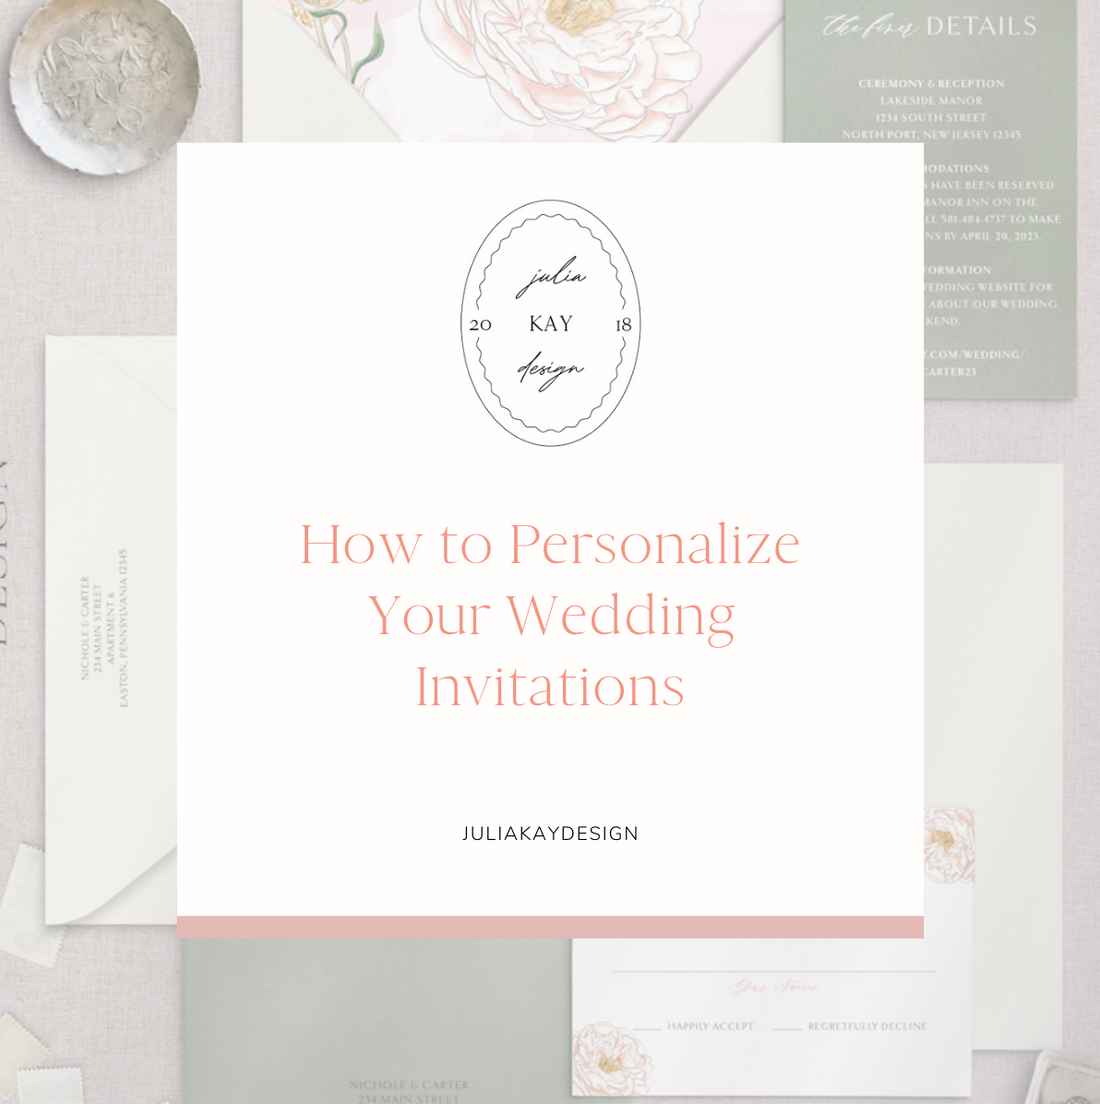 How to Personalize Your Wedding Invitations